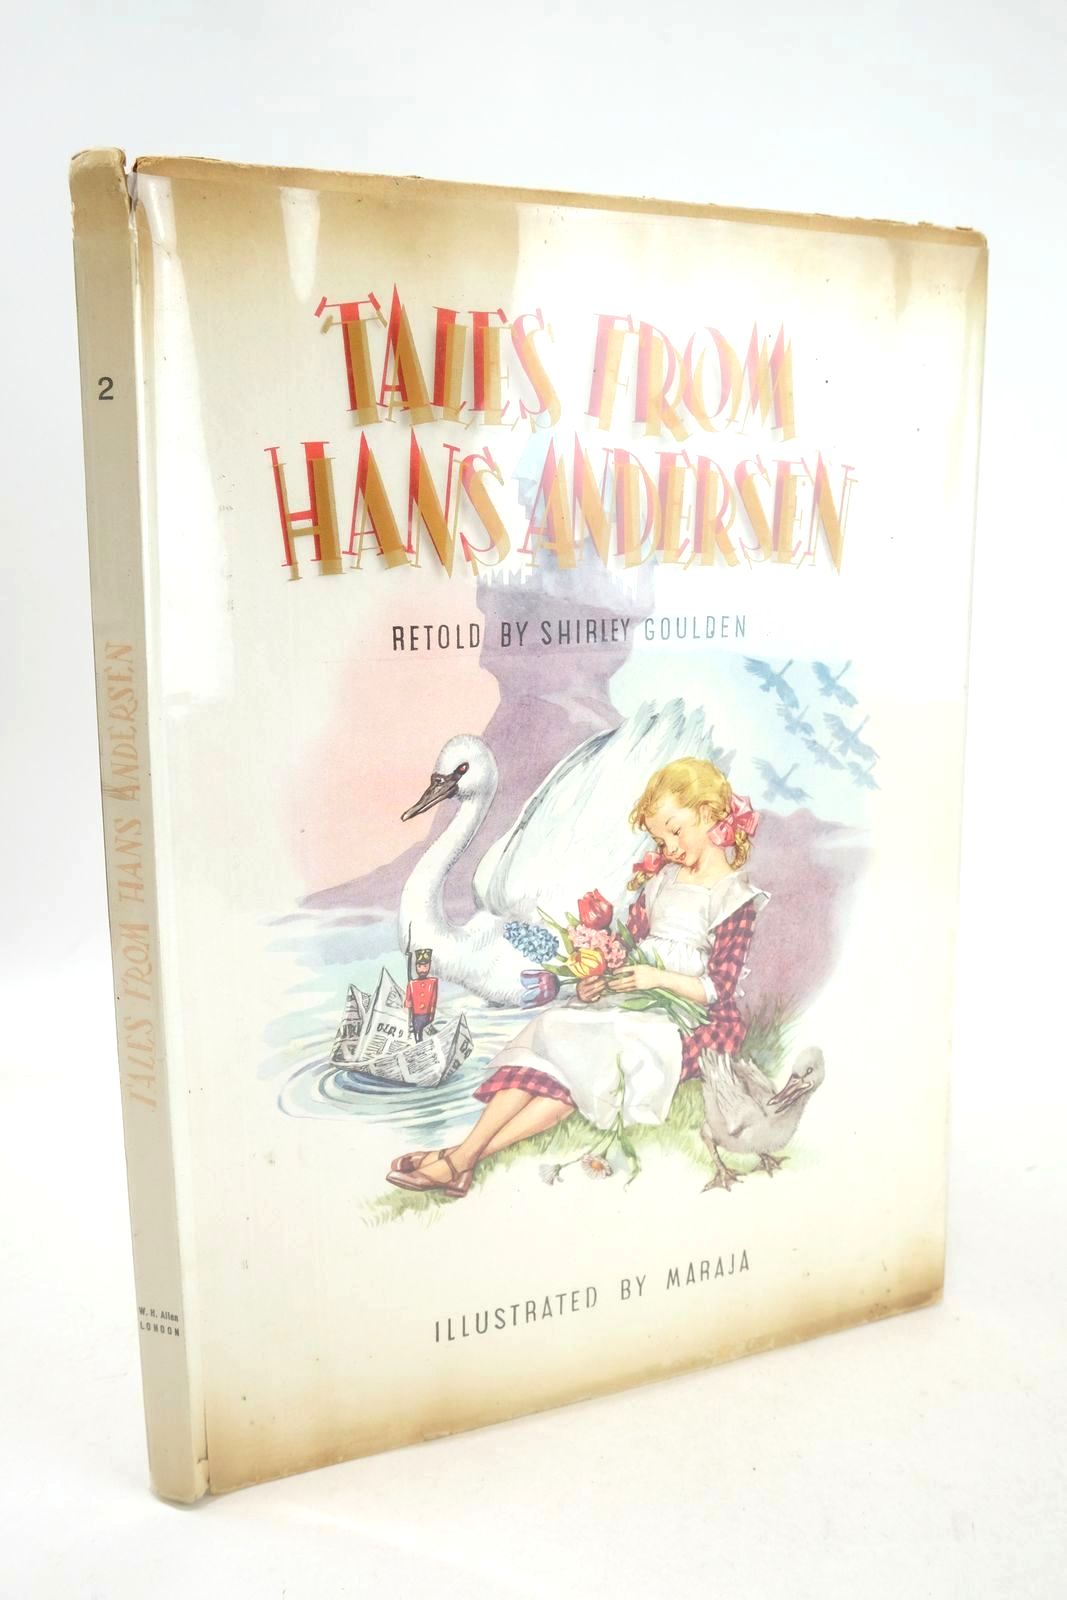 Photo of TALES FROM HANS ANDERSEN written by Andersen, Hans Christian
Goulden, Shirley illustrated by Maraja, published by W.H. Allen & Co. Limited (STOCK CODE: 1325913)  for sale by Stella & Rose's Books